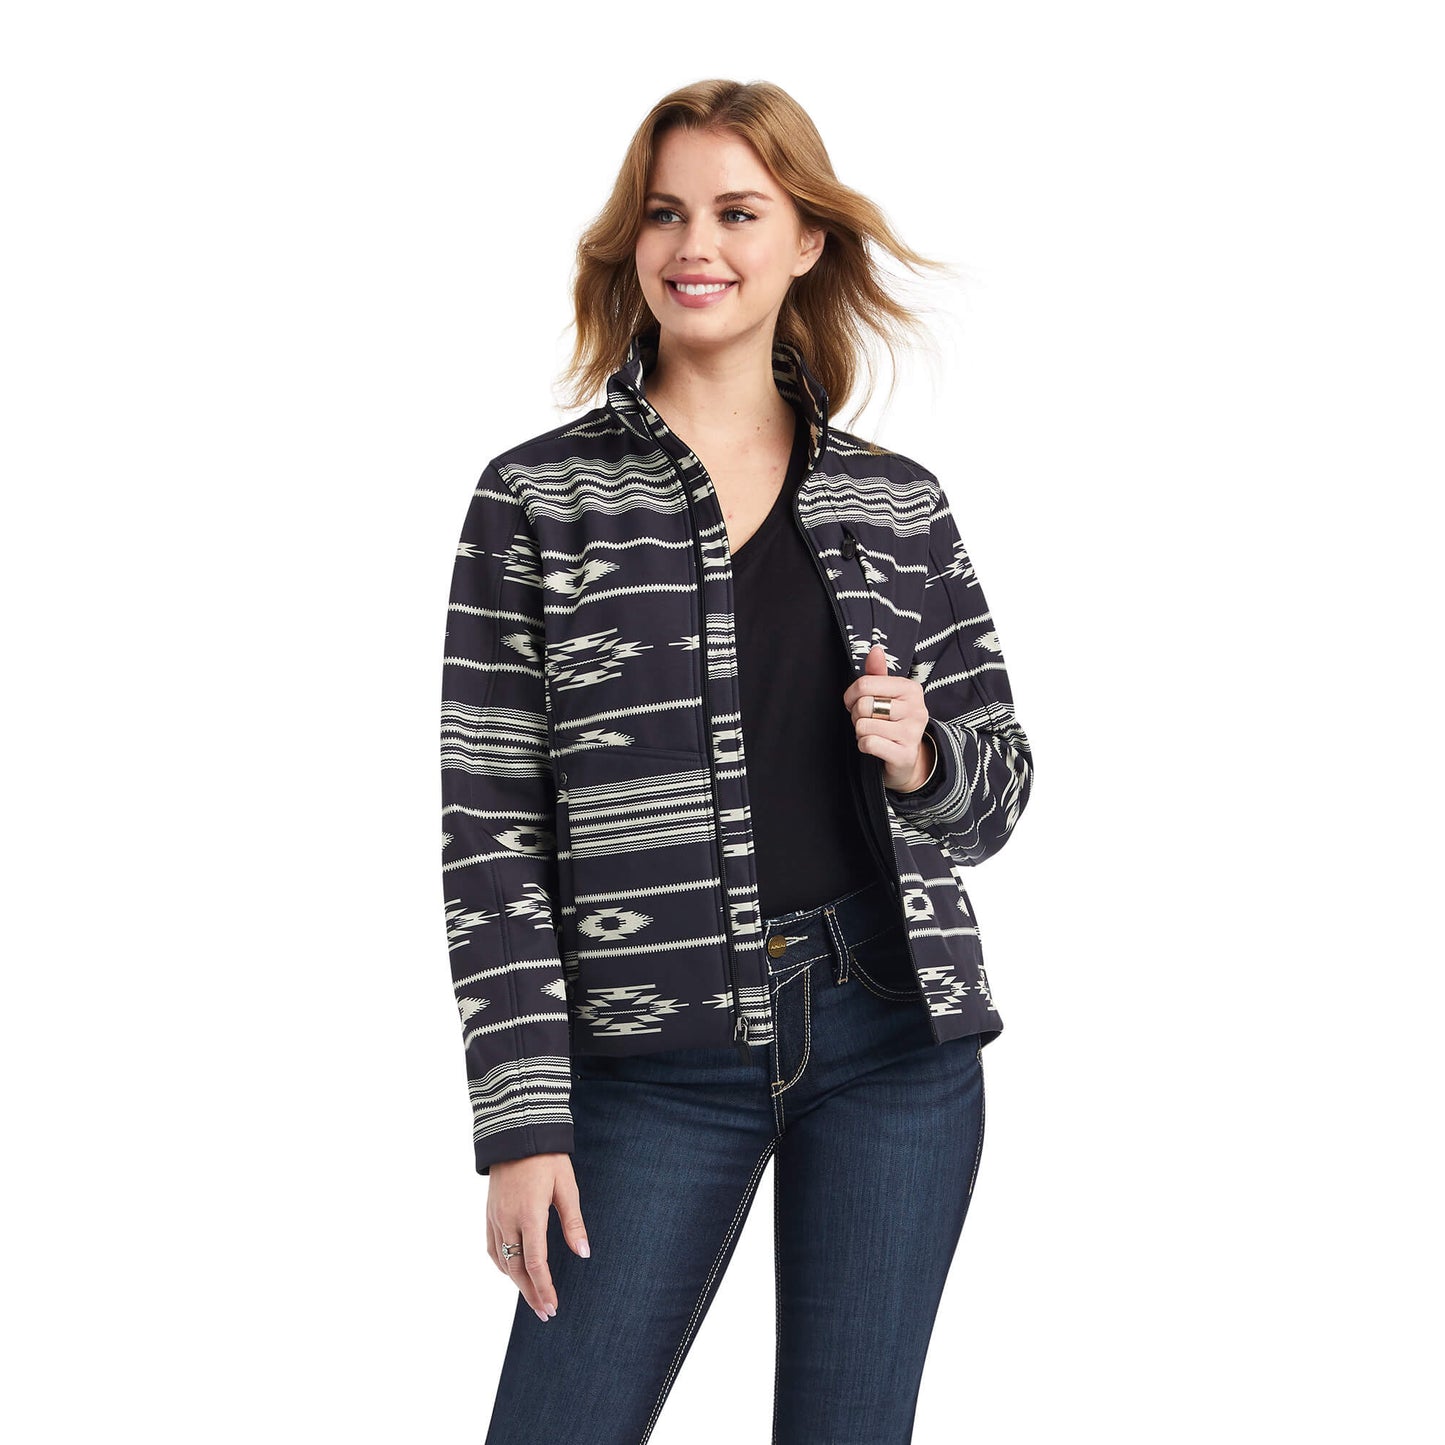 Softshell Chimayo Jacket   Women's Concealed carry